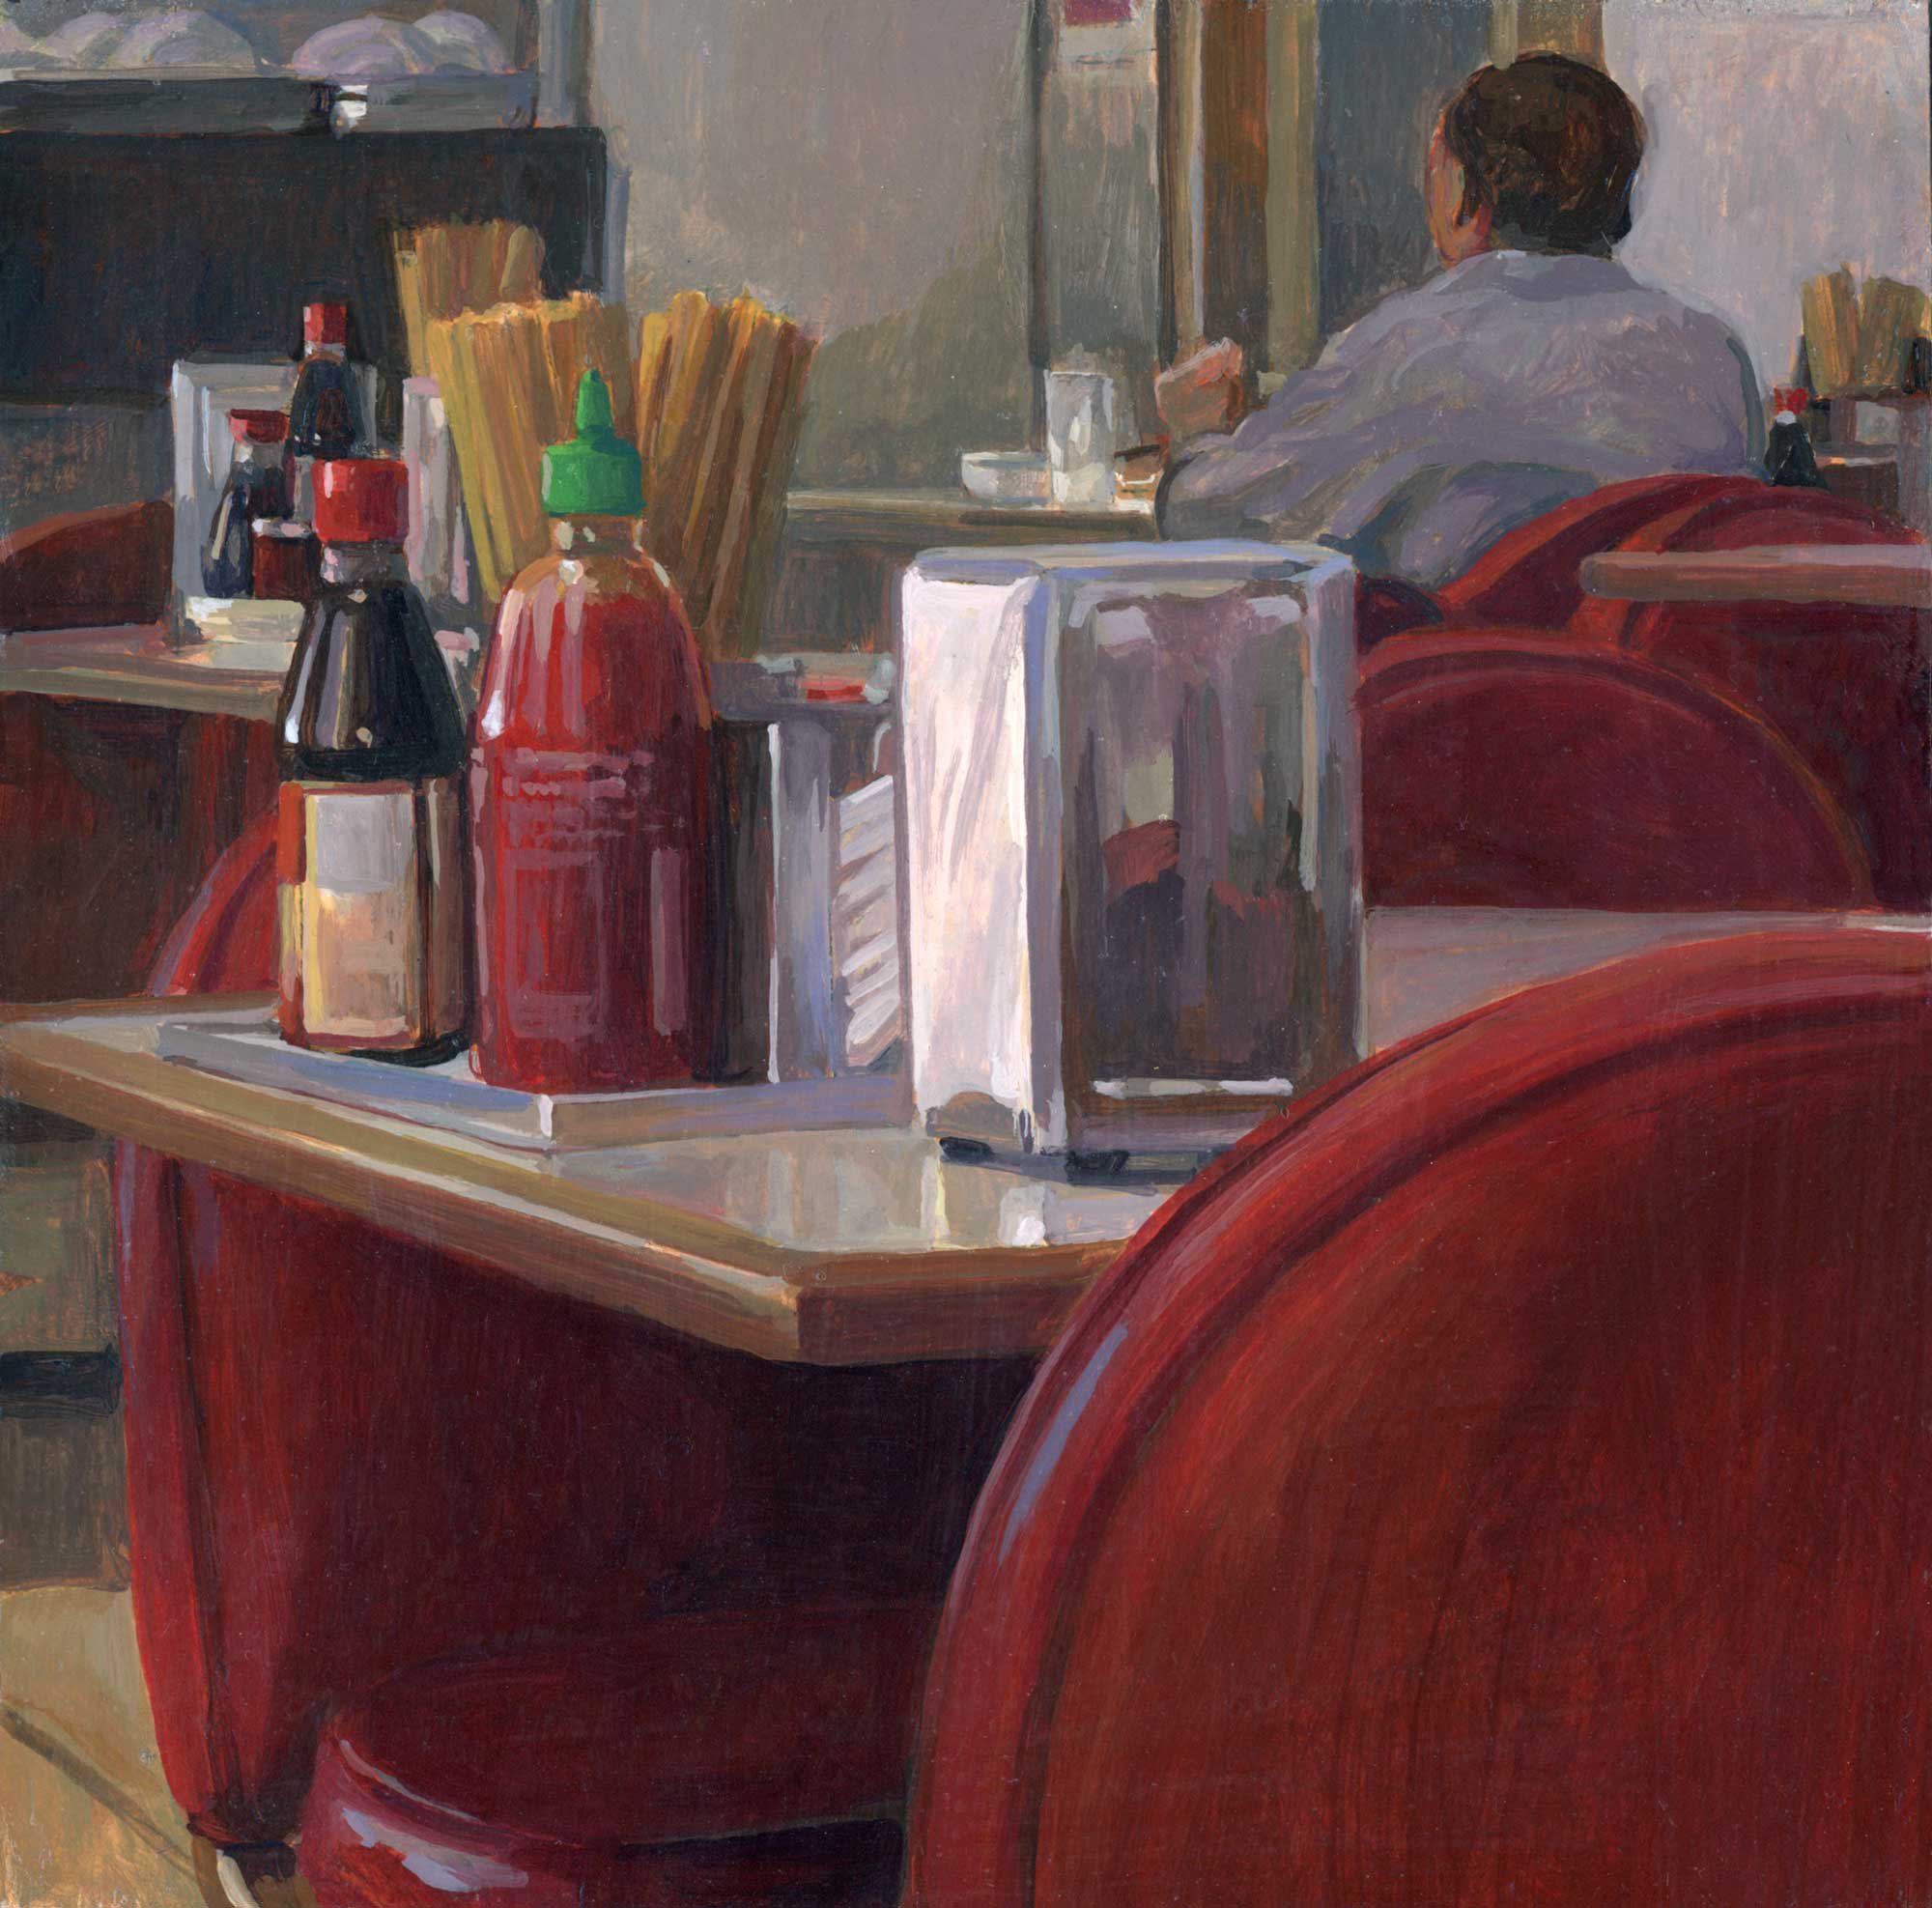 Red Sauce, Red Chairs by Wayne Jiang